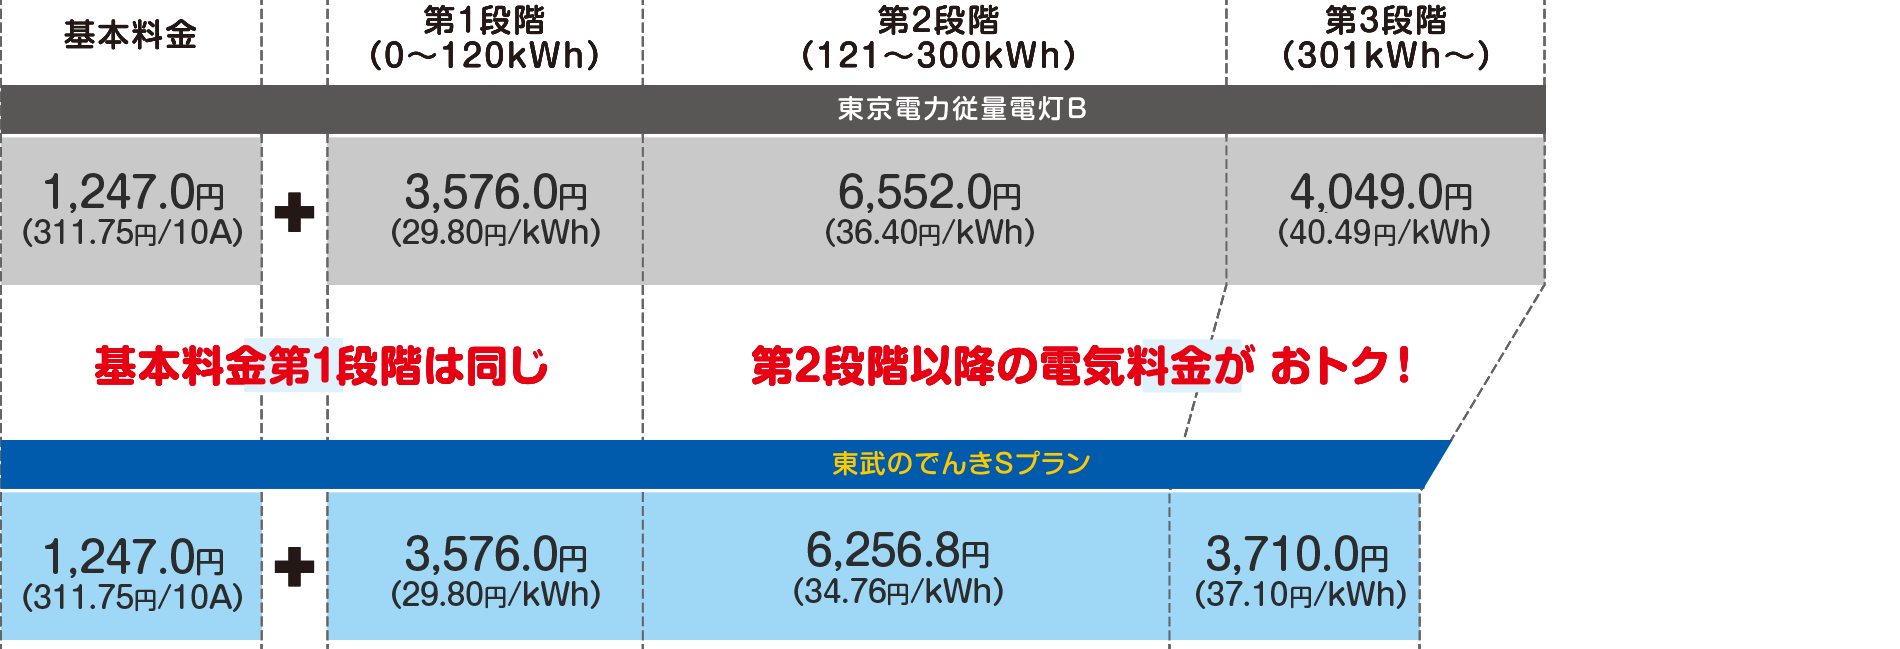 40A・400kWh使用時のイメージ